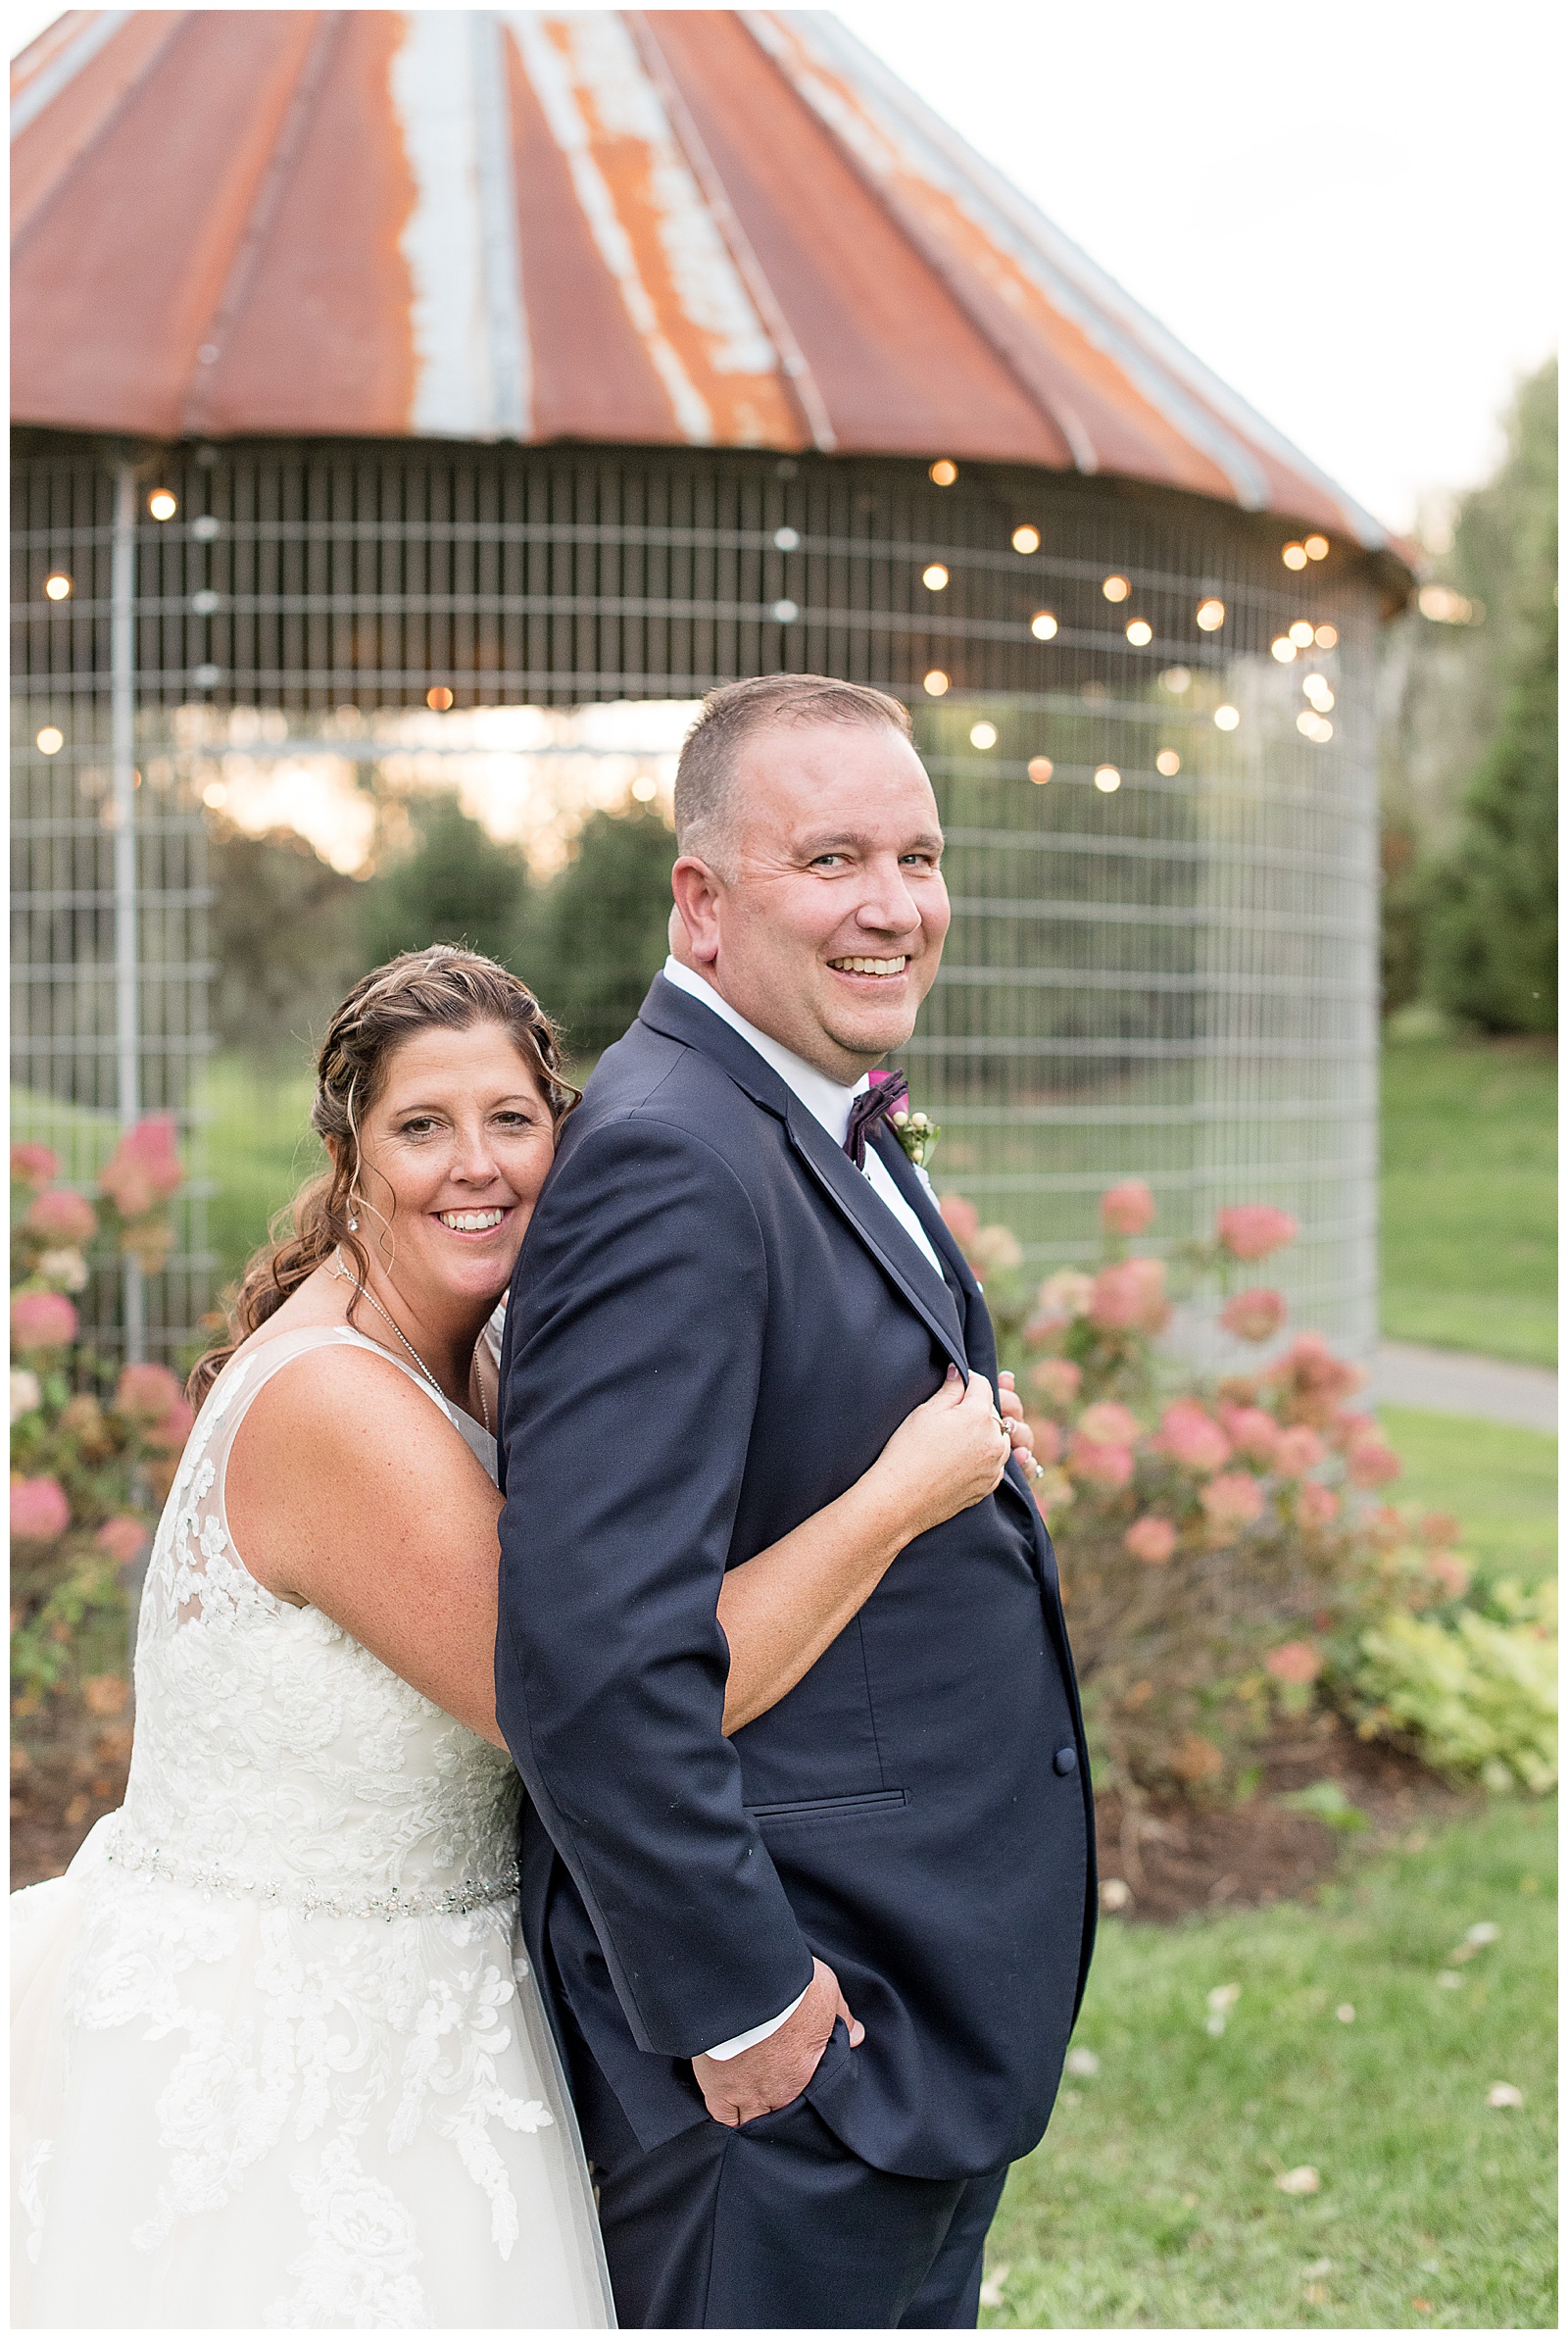 wife has arms wrapped around groom from behind as they both smile towards camera with corn crib behind